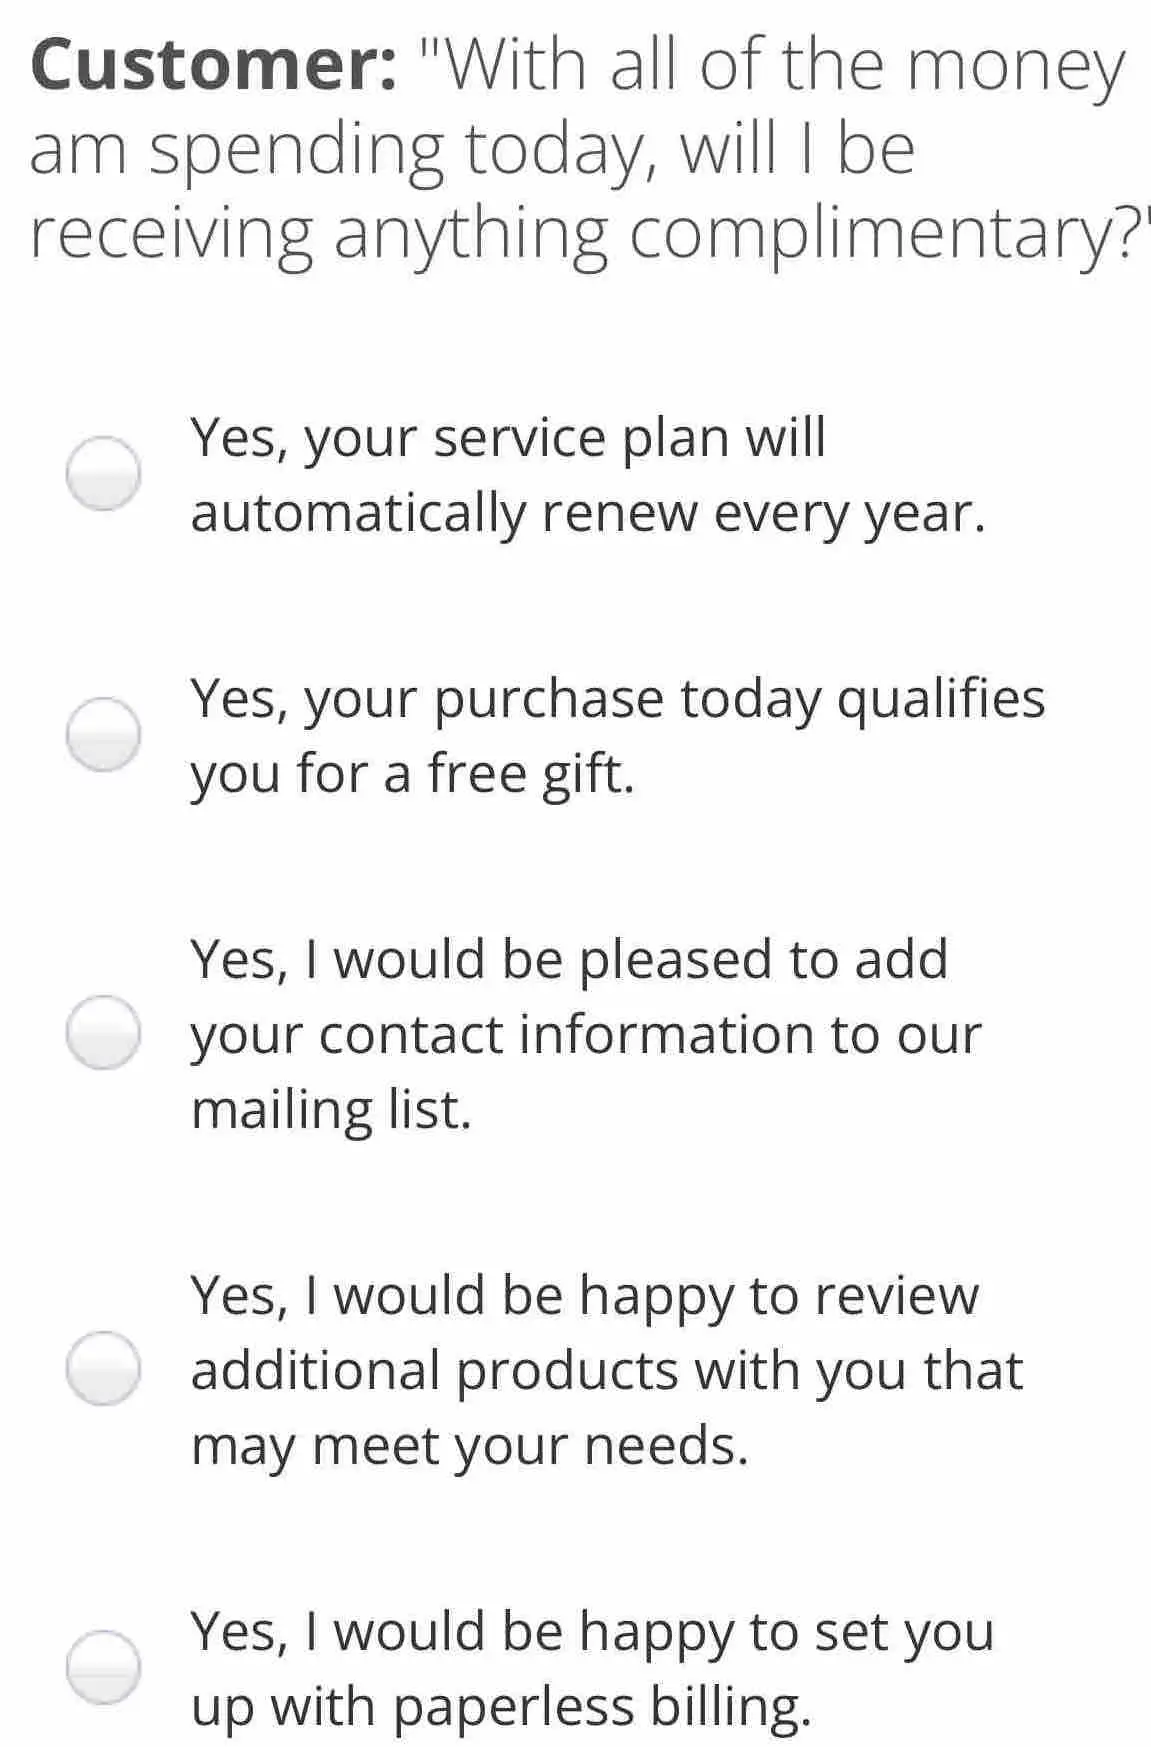 Customer: "With all of the money am spending today, will I be receiving anything complimentary? Yes, your service plan will automatically renew every year. Yes, your purchase today qualifies you for a free gift. Yes, I would be pleased to add your contact information to our mailing list. Yes, I would be happy to review additional products with you that may meet your needs. Yes, I would be happy to set you up with paperless billing.